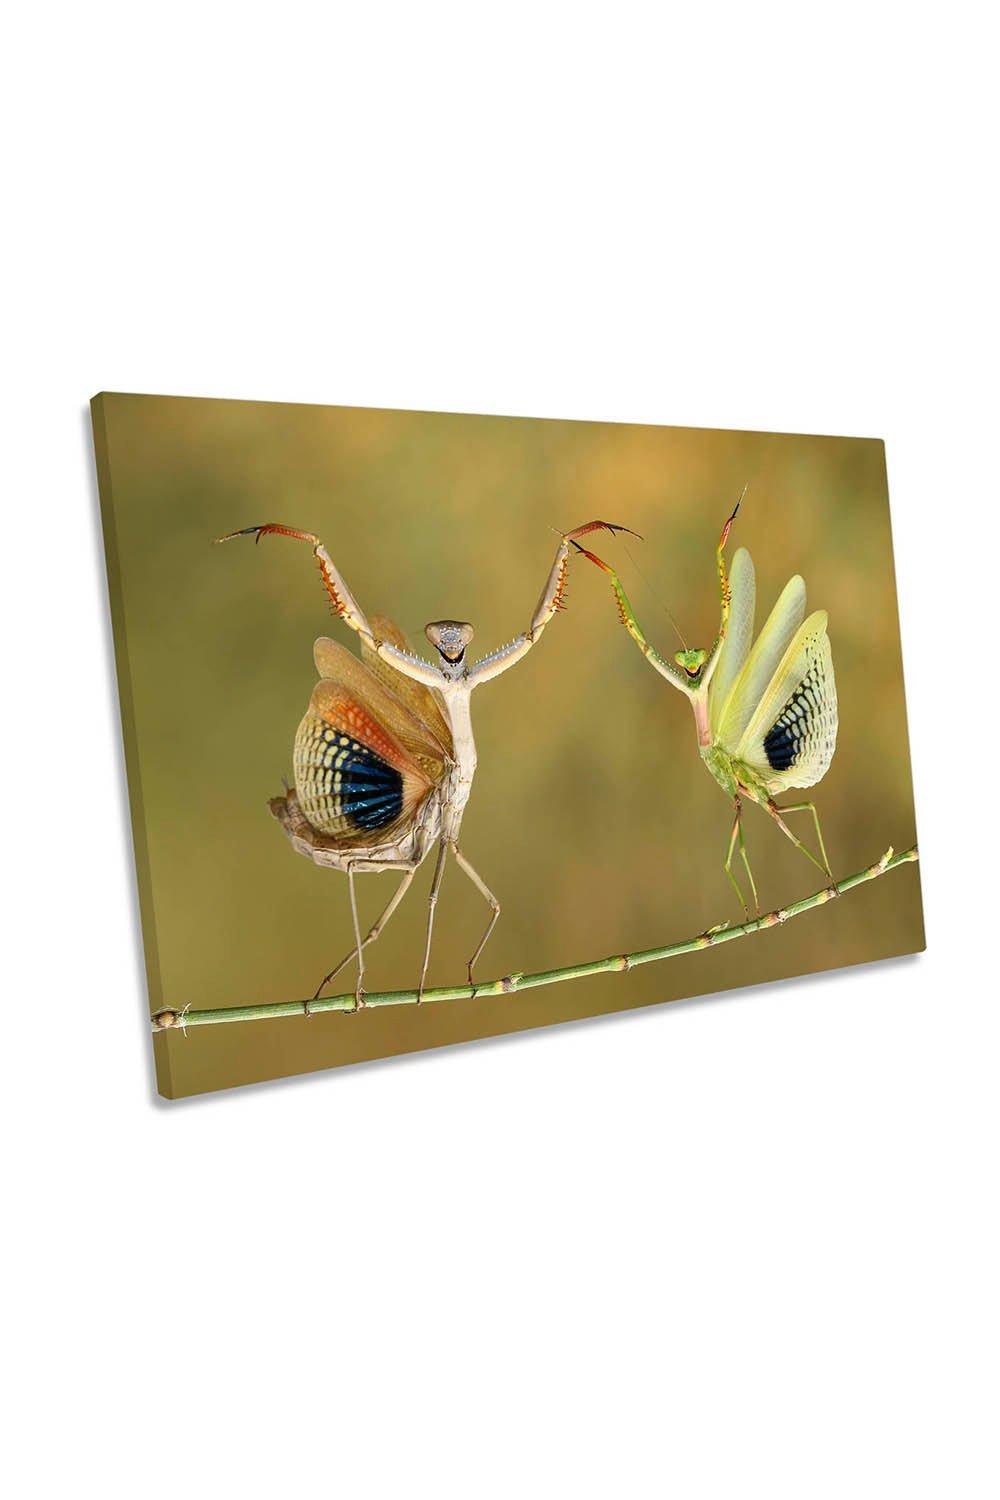 Showtime Funny Insect Dance Canvas Wall Art Picture Print